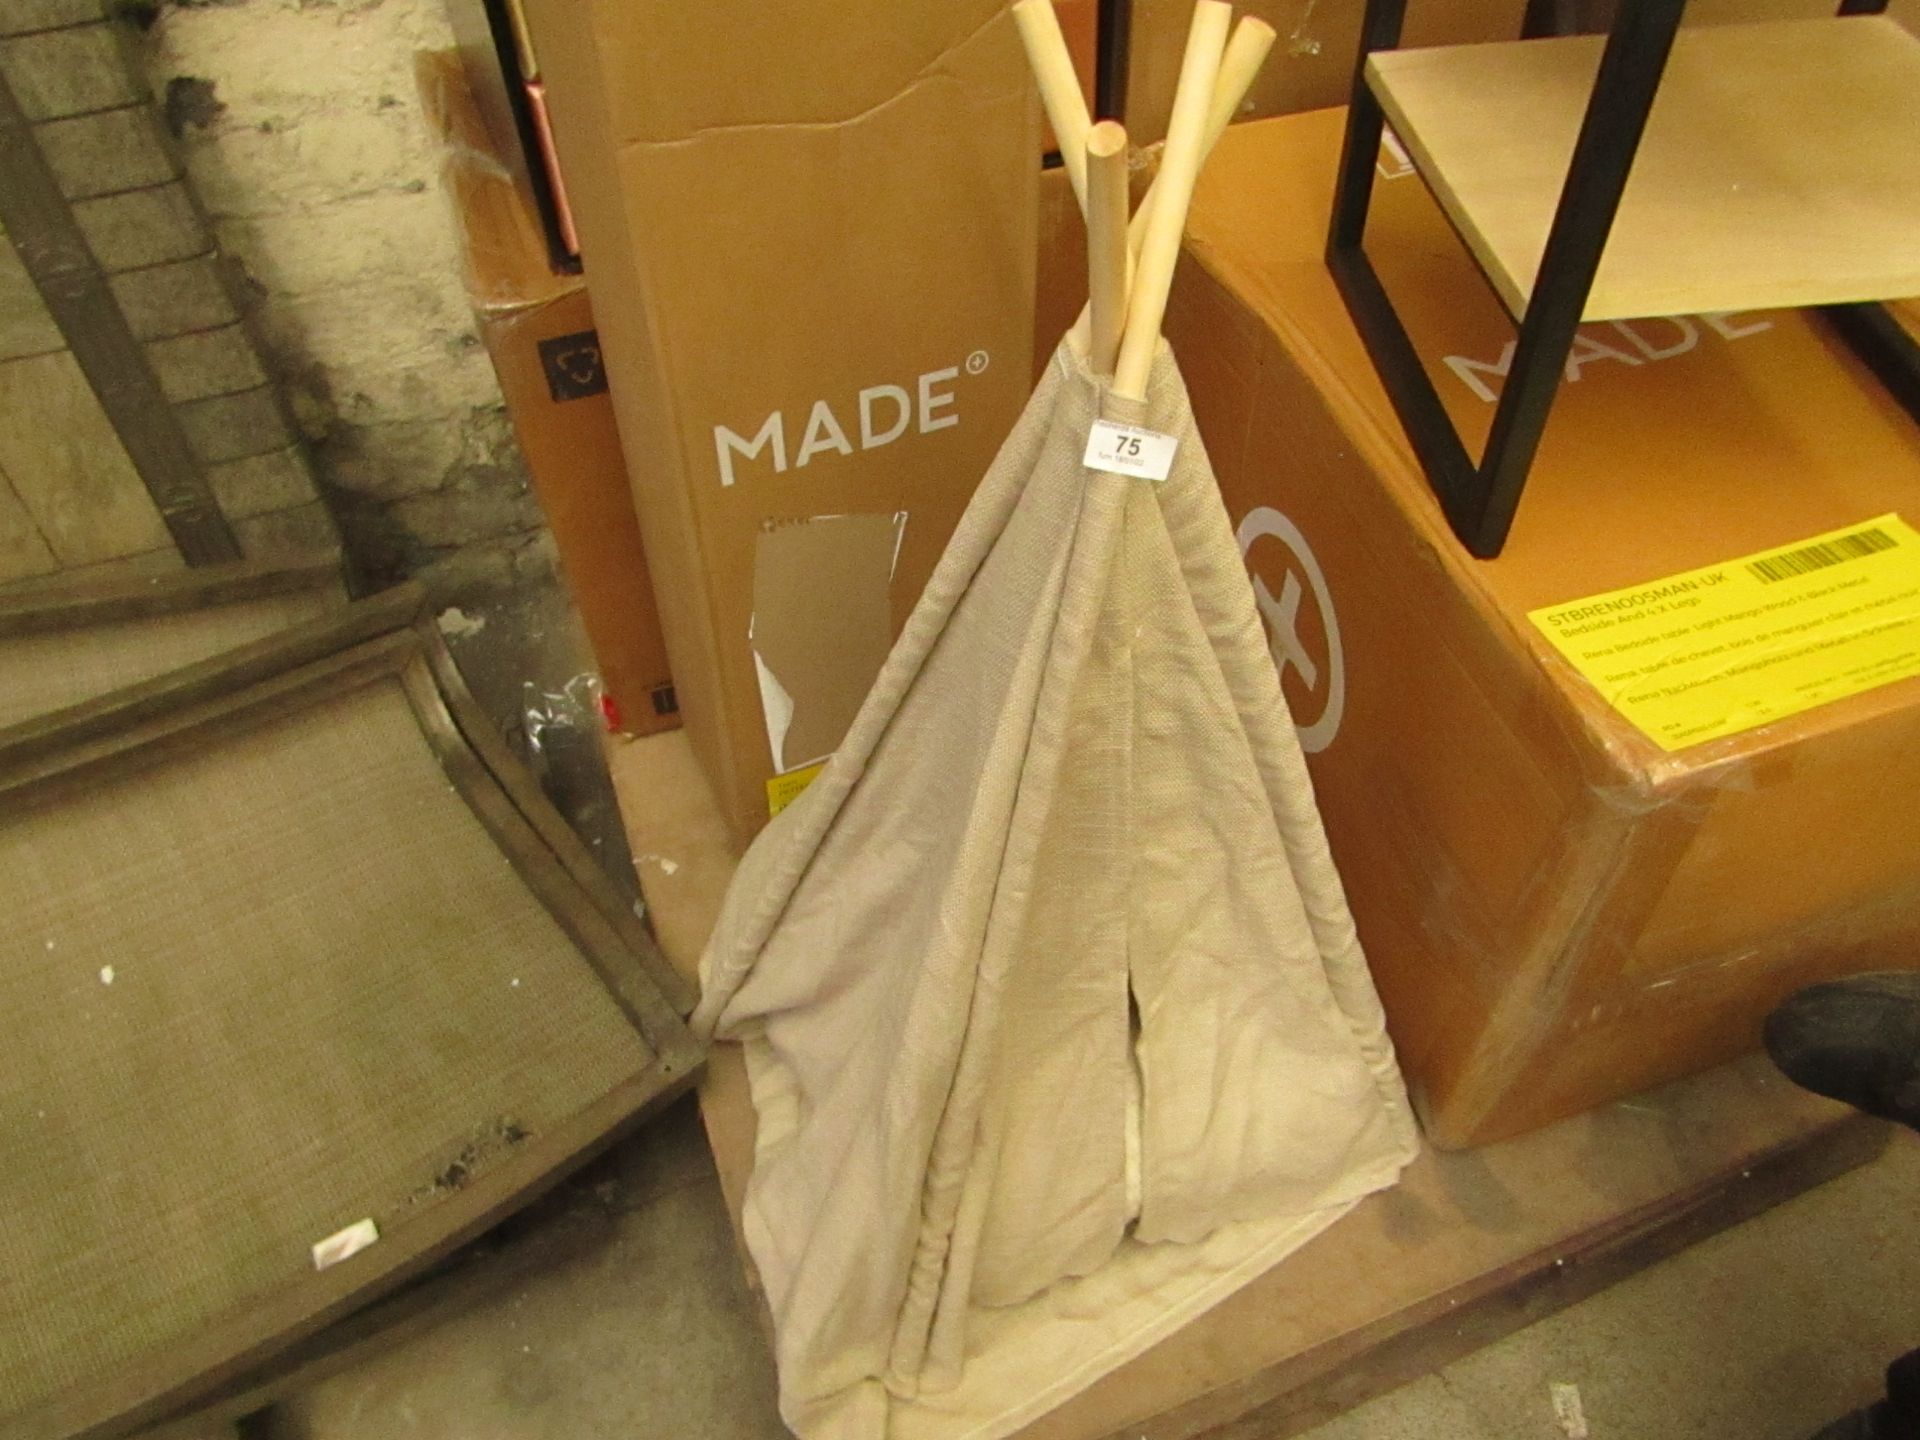 1 x Made.com Terri Square Teepee Natural Taupe RRP £39 SKU MAD-AP-PETTER004GRE-UK TOTAL RRP £39 This